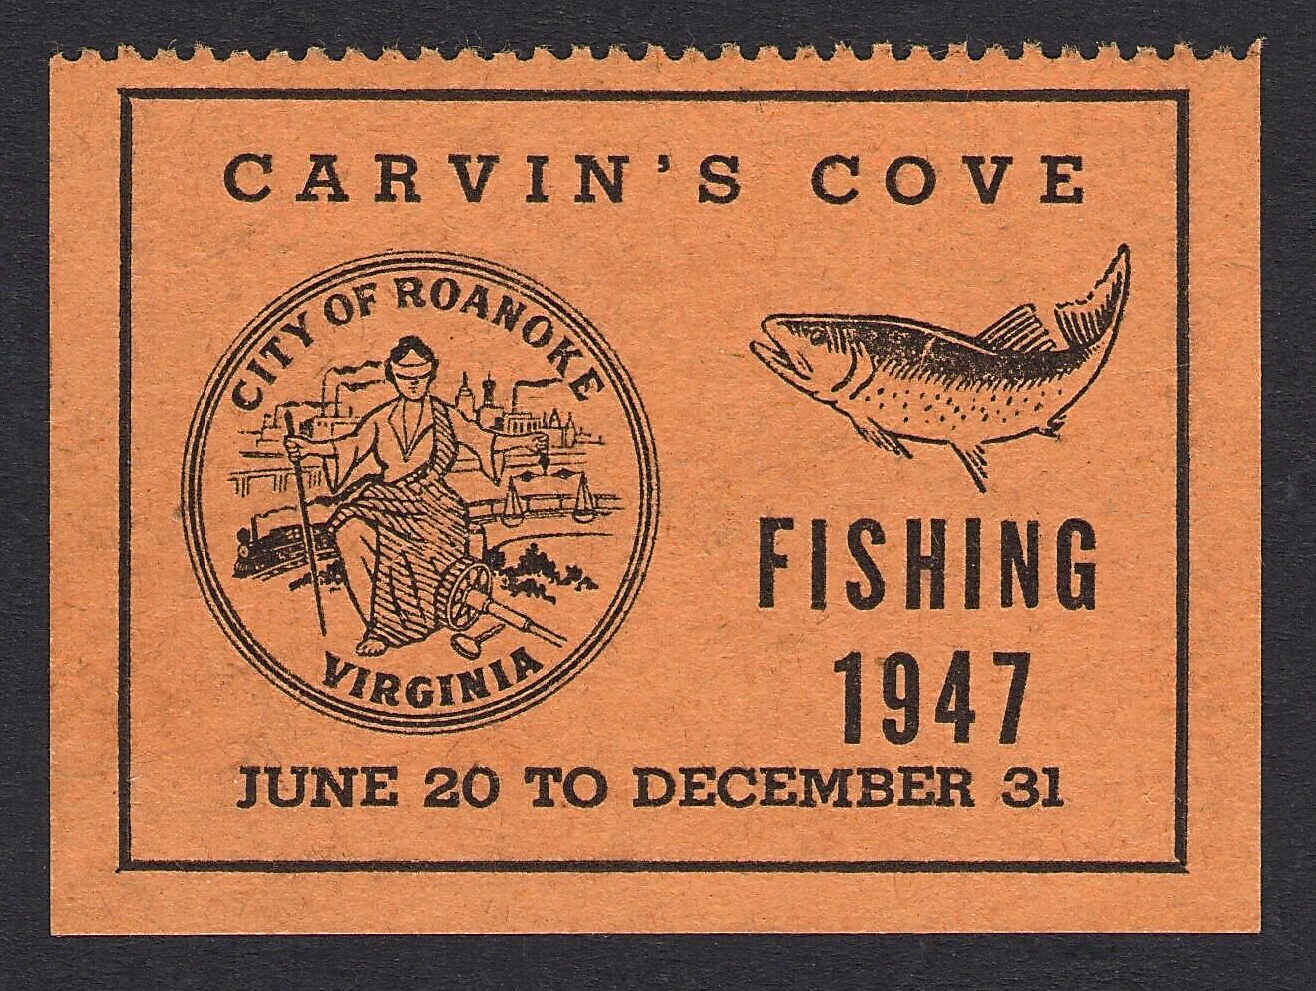 1947 Carvin's Cove Fishing